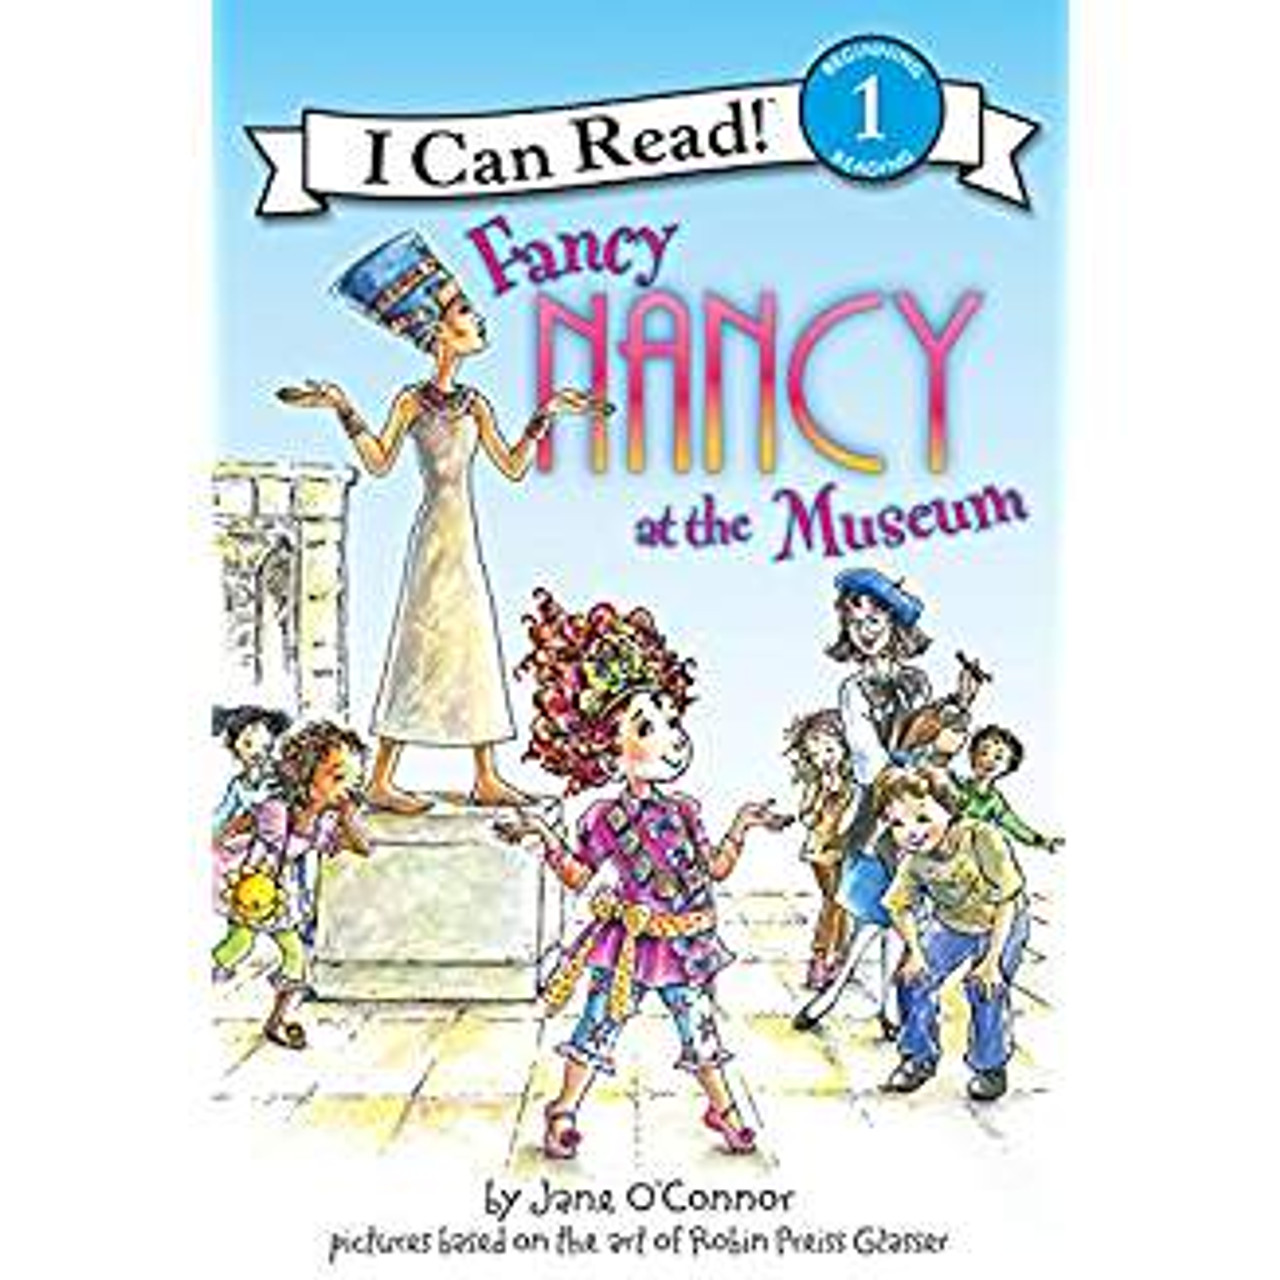 Nancy's class is going on a trip to the museum, and Nancy wants to be extra fancy for the occasion. After a bumpy bus ride, she doesn't feel very well. Luckily for Nancy, her teacher has a few fancy tricks of her own. Full color.